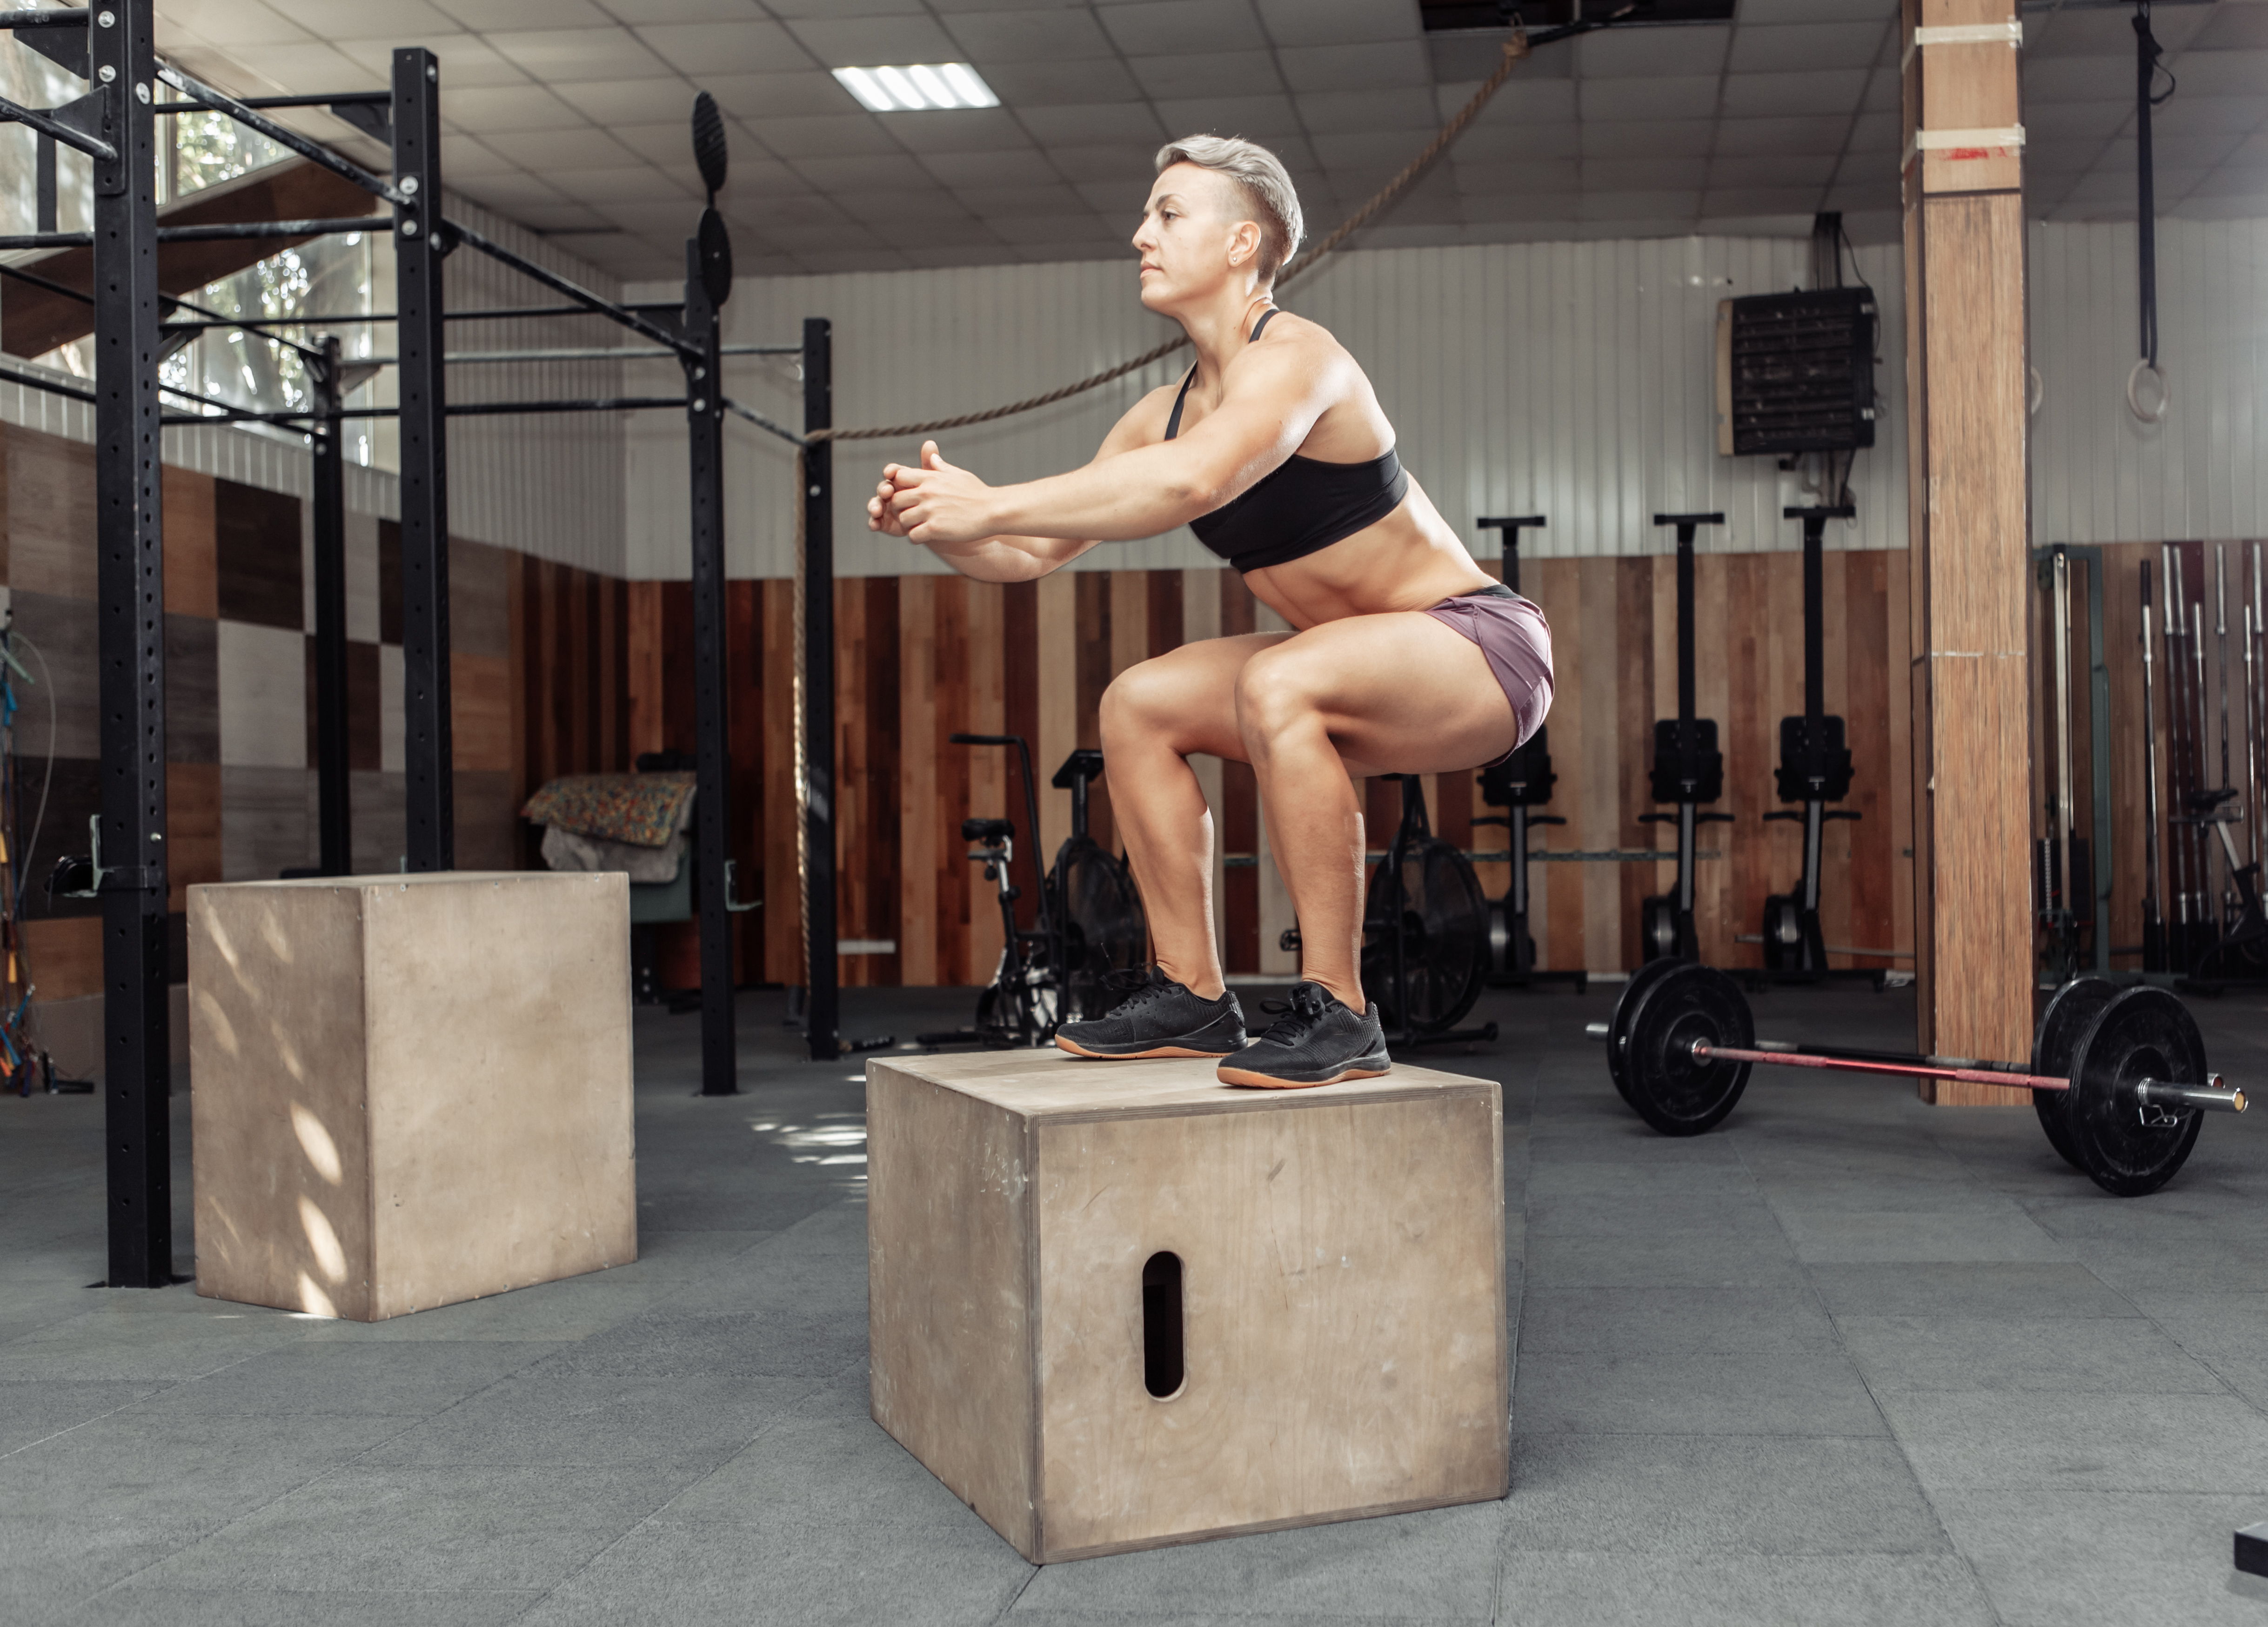 Reasons Box Jumps Are Hard and What to Do About Them